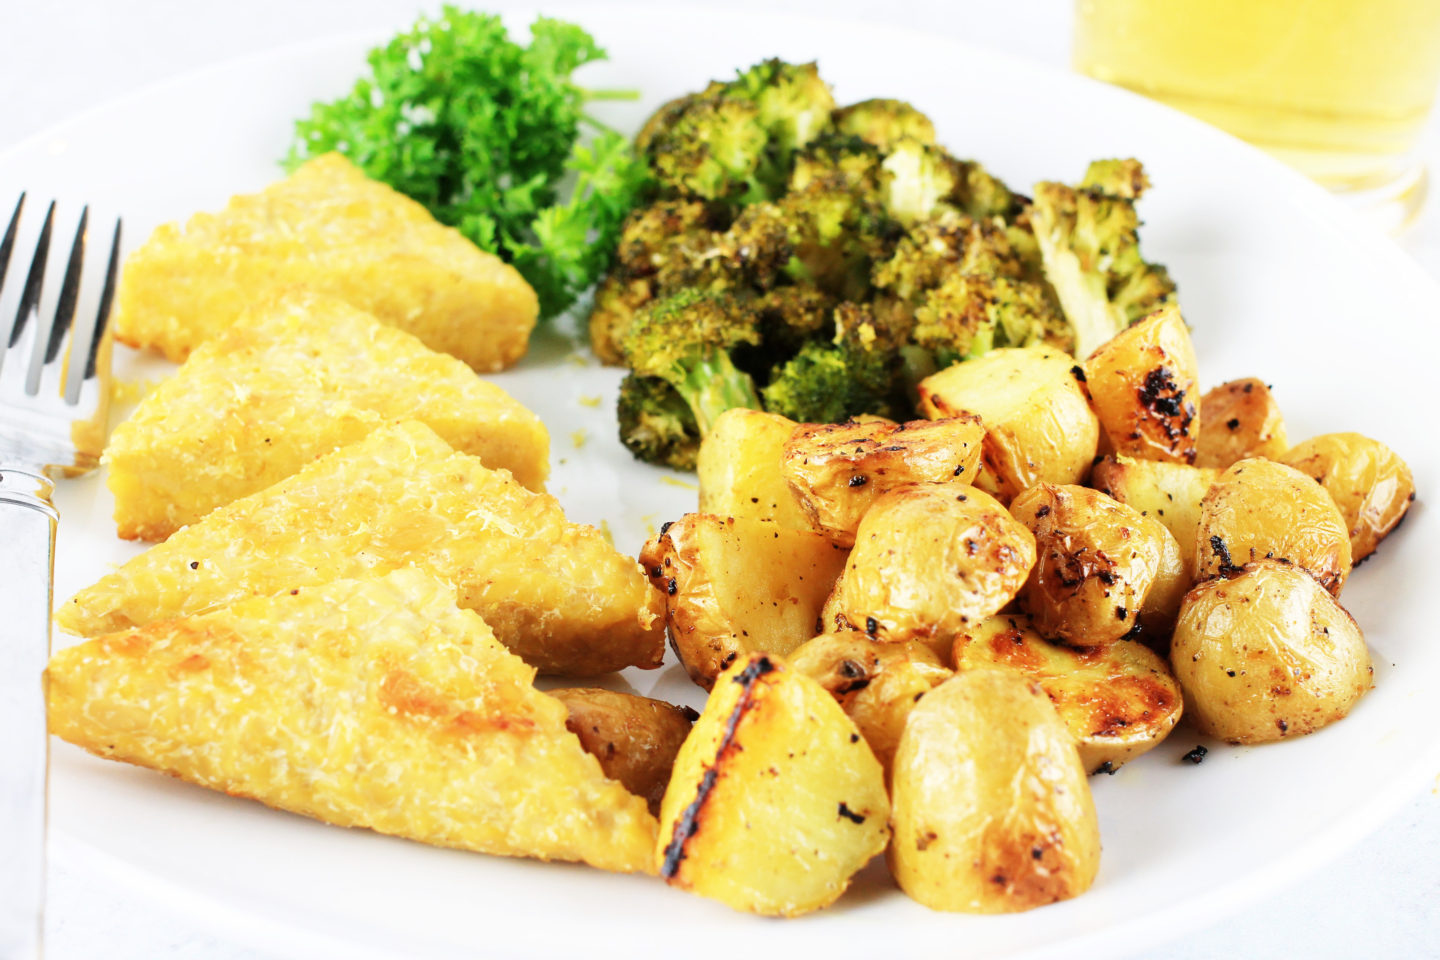 Tempeh broccoli and potatoes with all purpose marinade